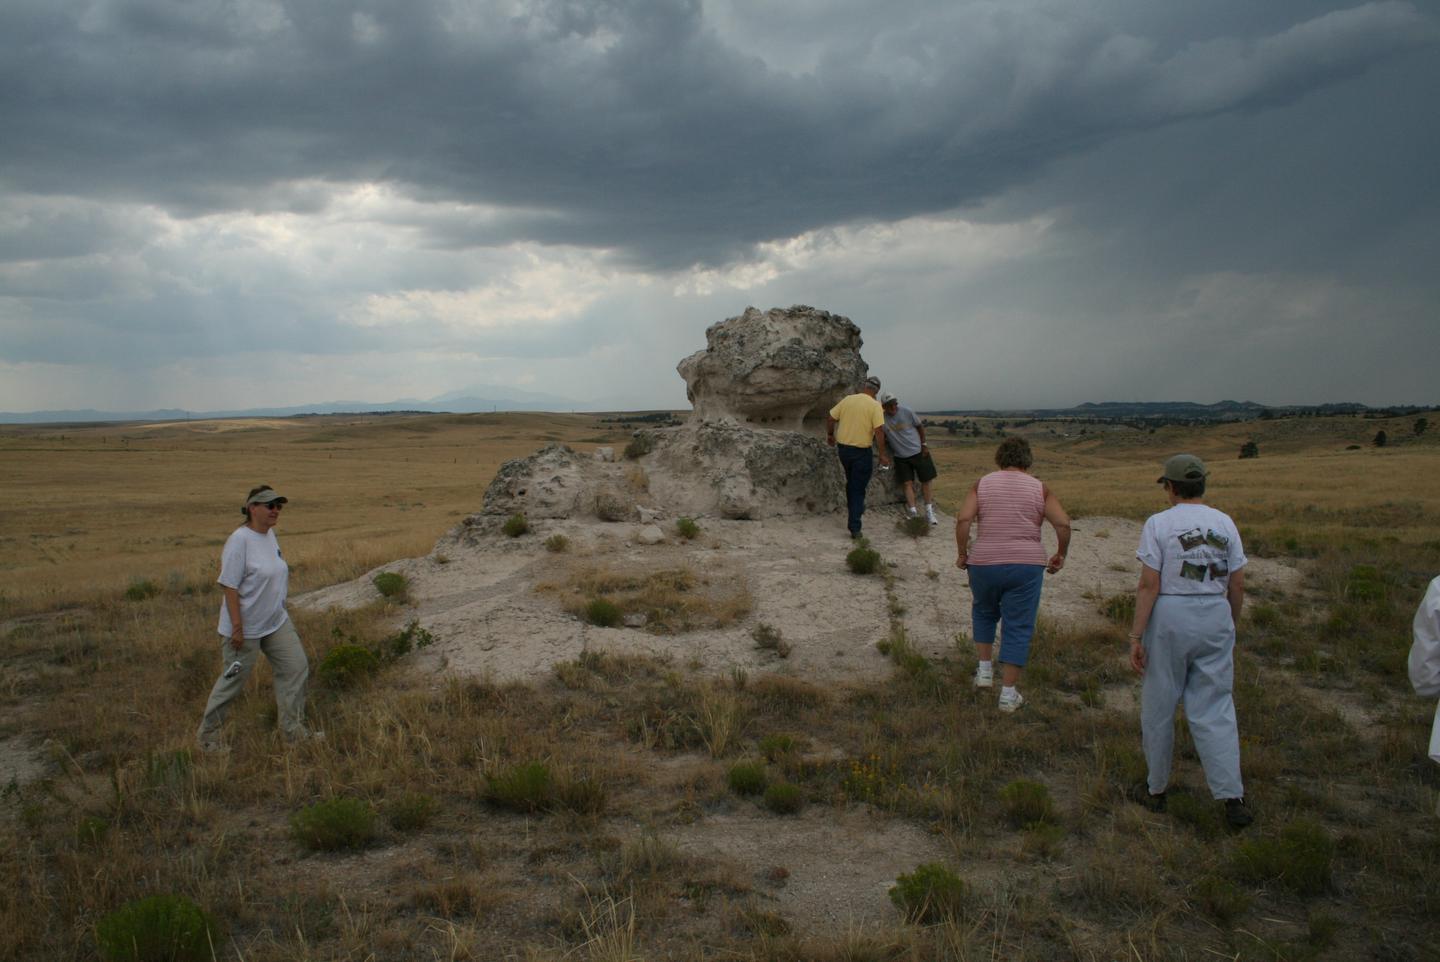 Porters Rock, WyomingVisitors approach Porters Rock in Wyoming.